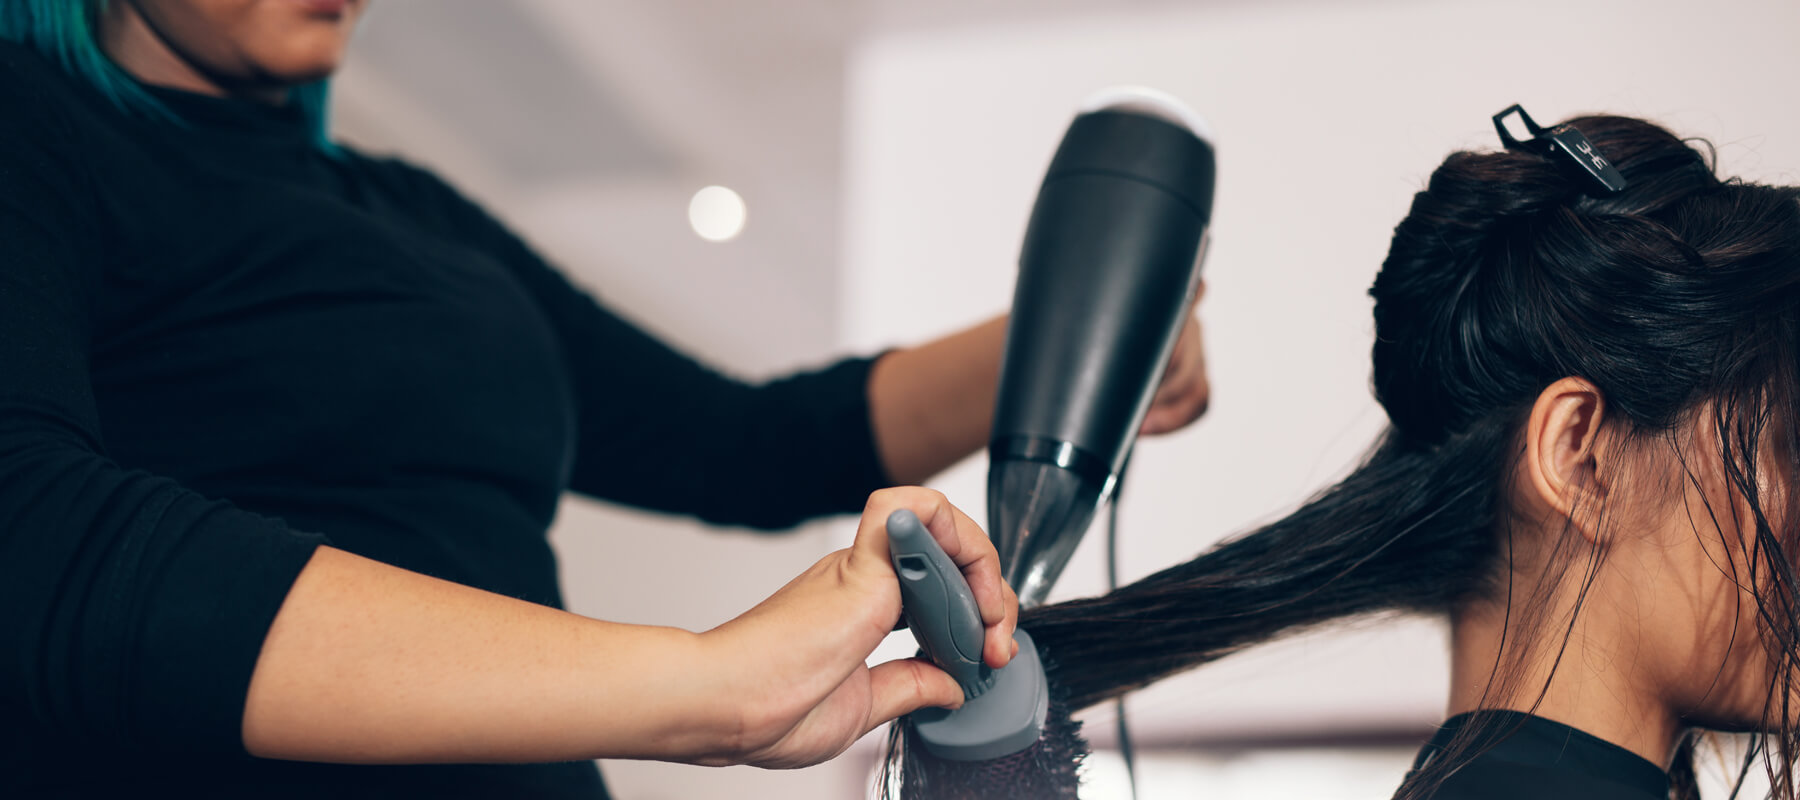 Blow drying hair at Styling Station